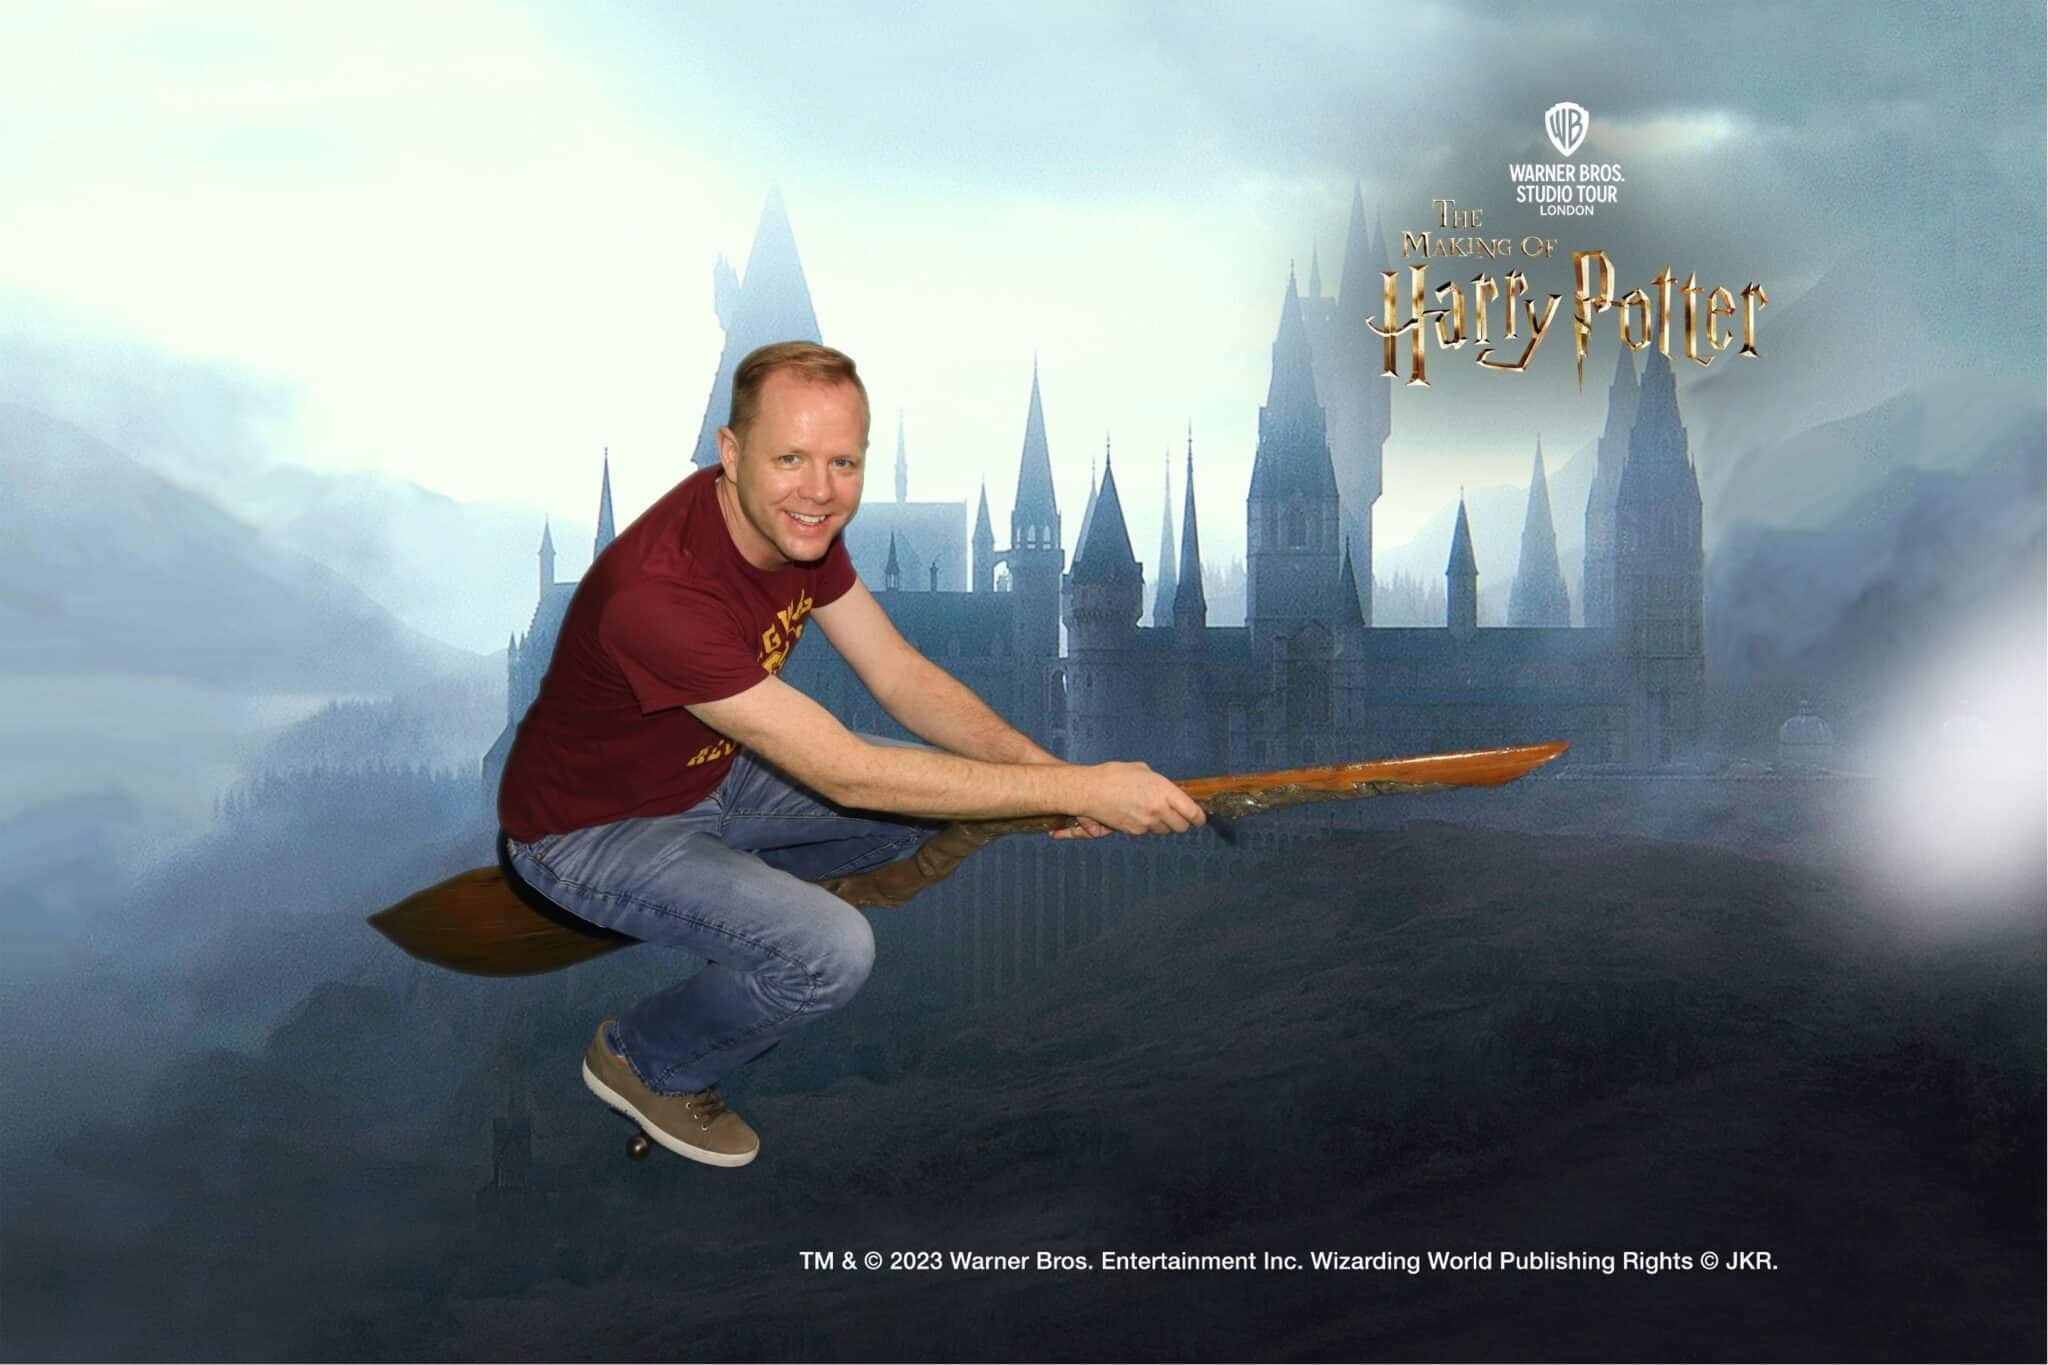 A photo download from the green screen experience at The Making of Harry Potter studio tour with a man on a broom flying in front of Hogwarts. 